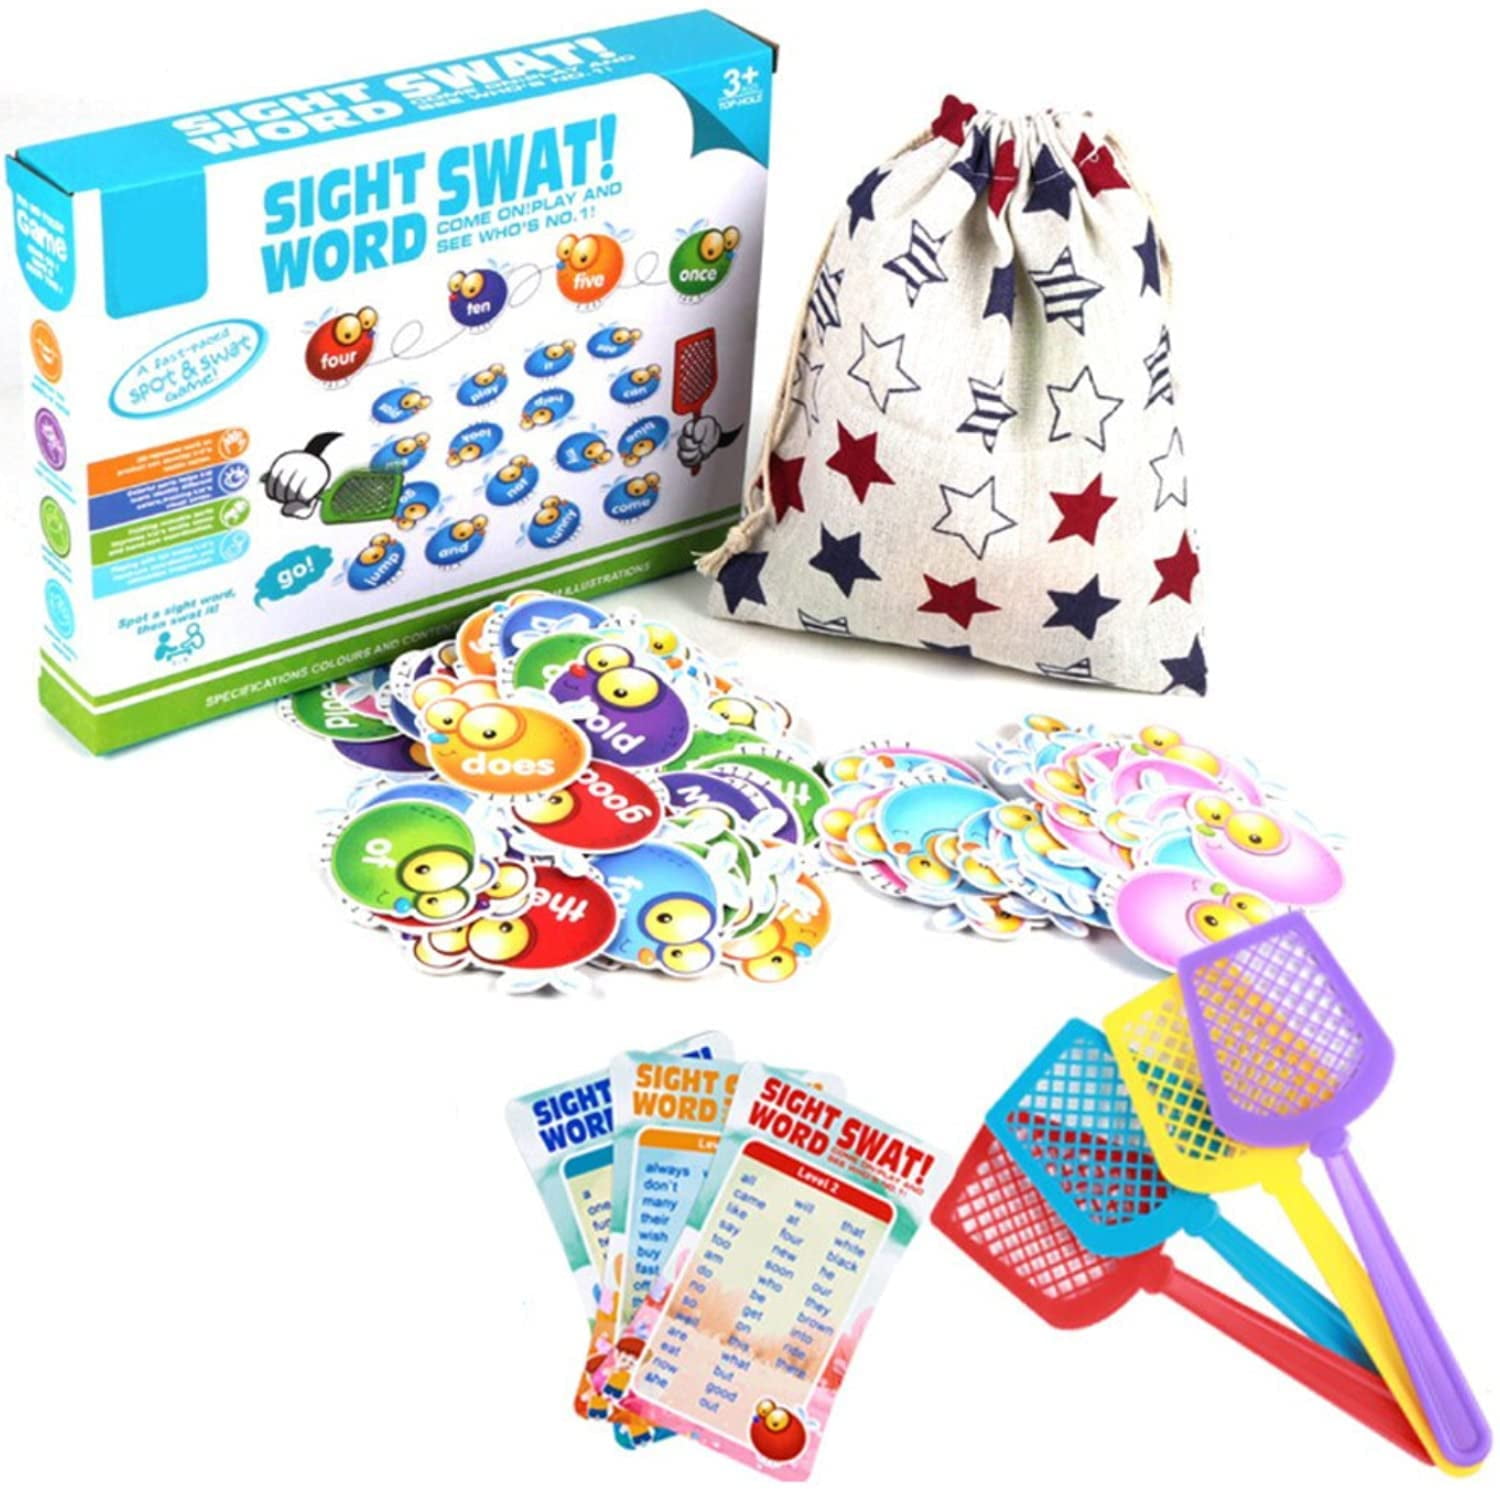 Homeschool Visual, Learning Resources Sight Word Swat a Sight Word Game 